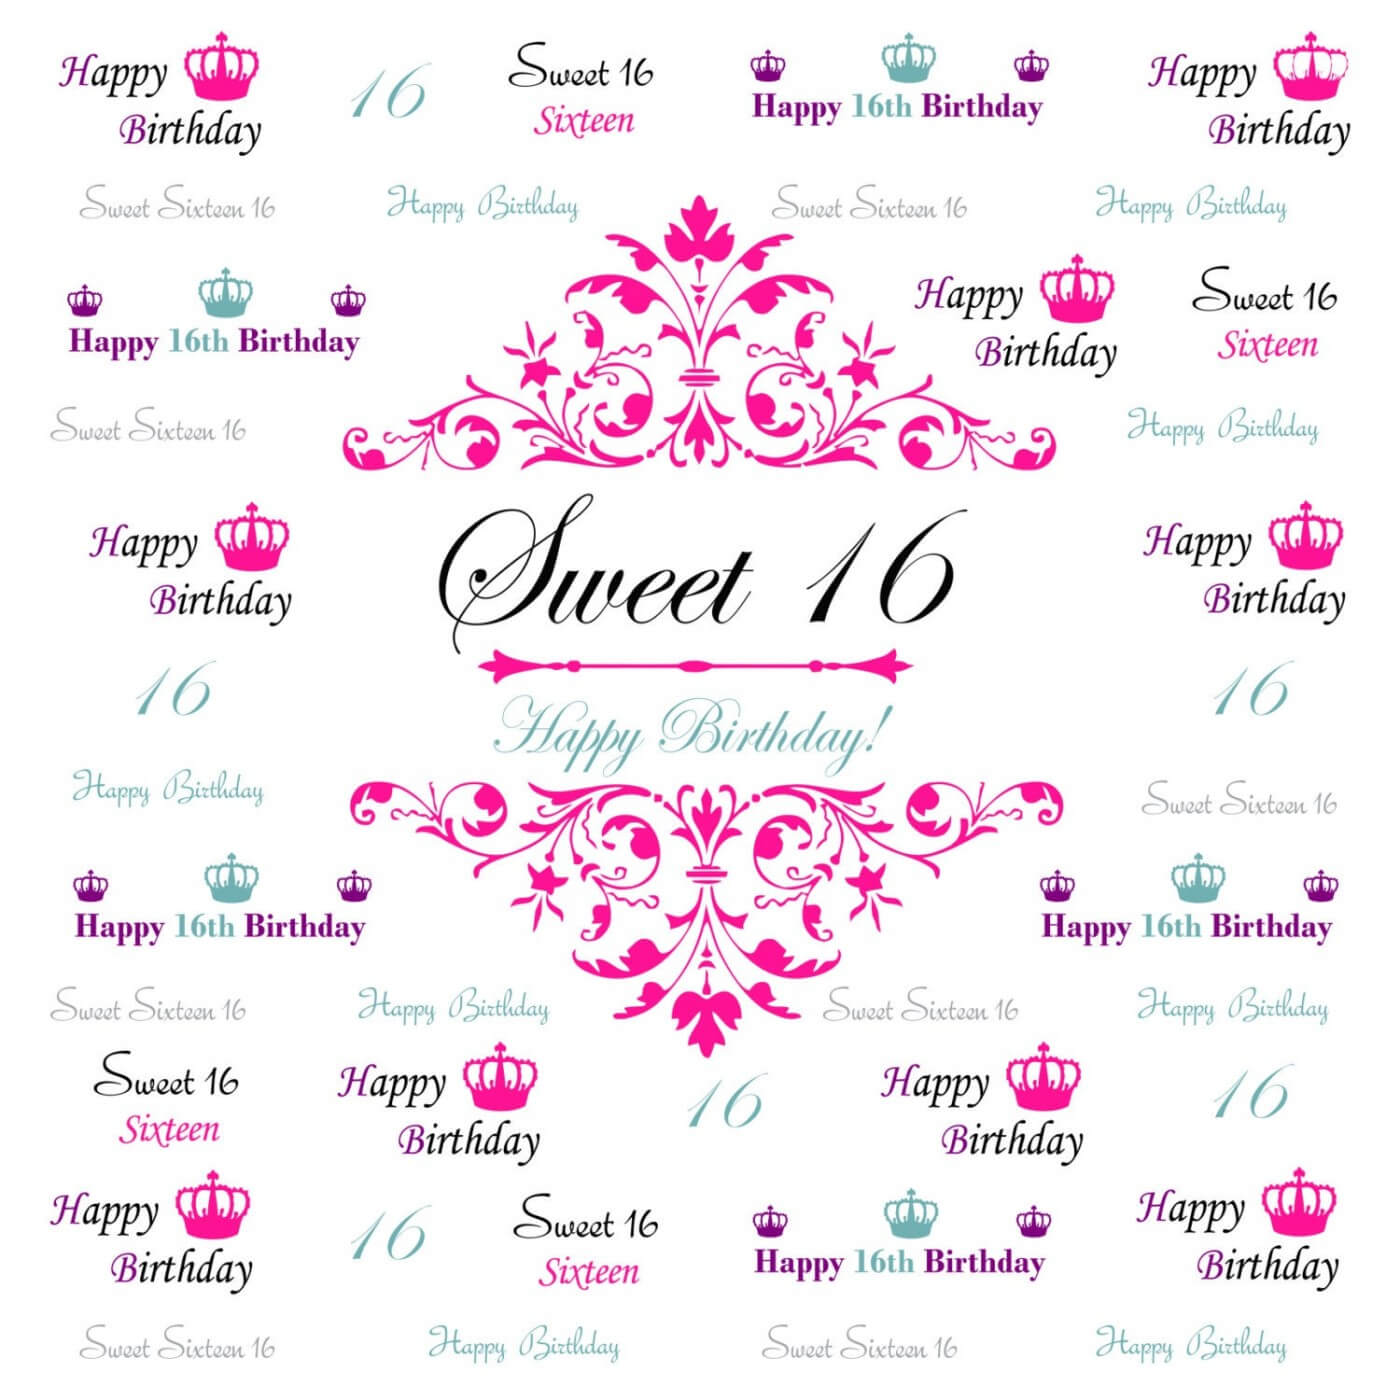 021 Template Ideas Step And Repeat Banner Il Fullxfull Intended For Sweet 16 Banner Template